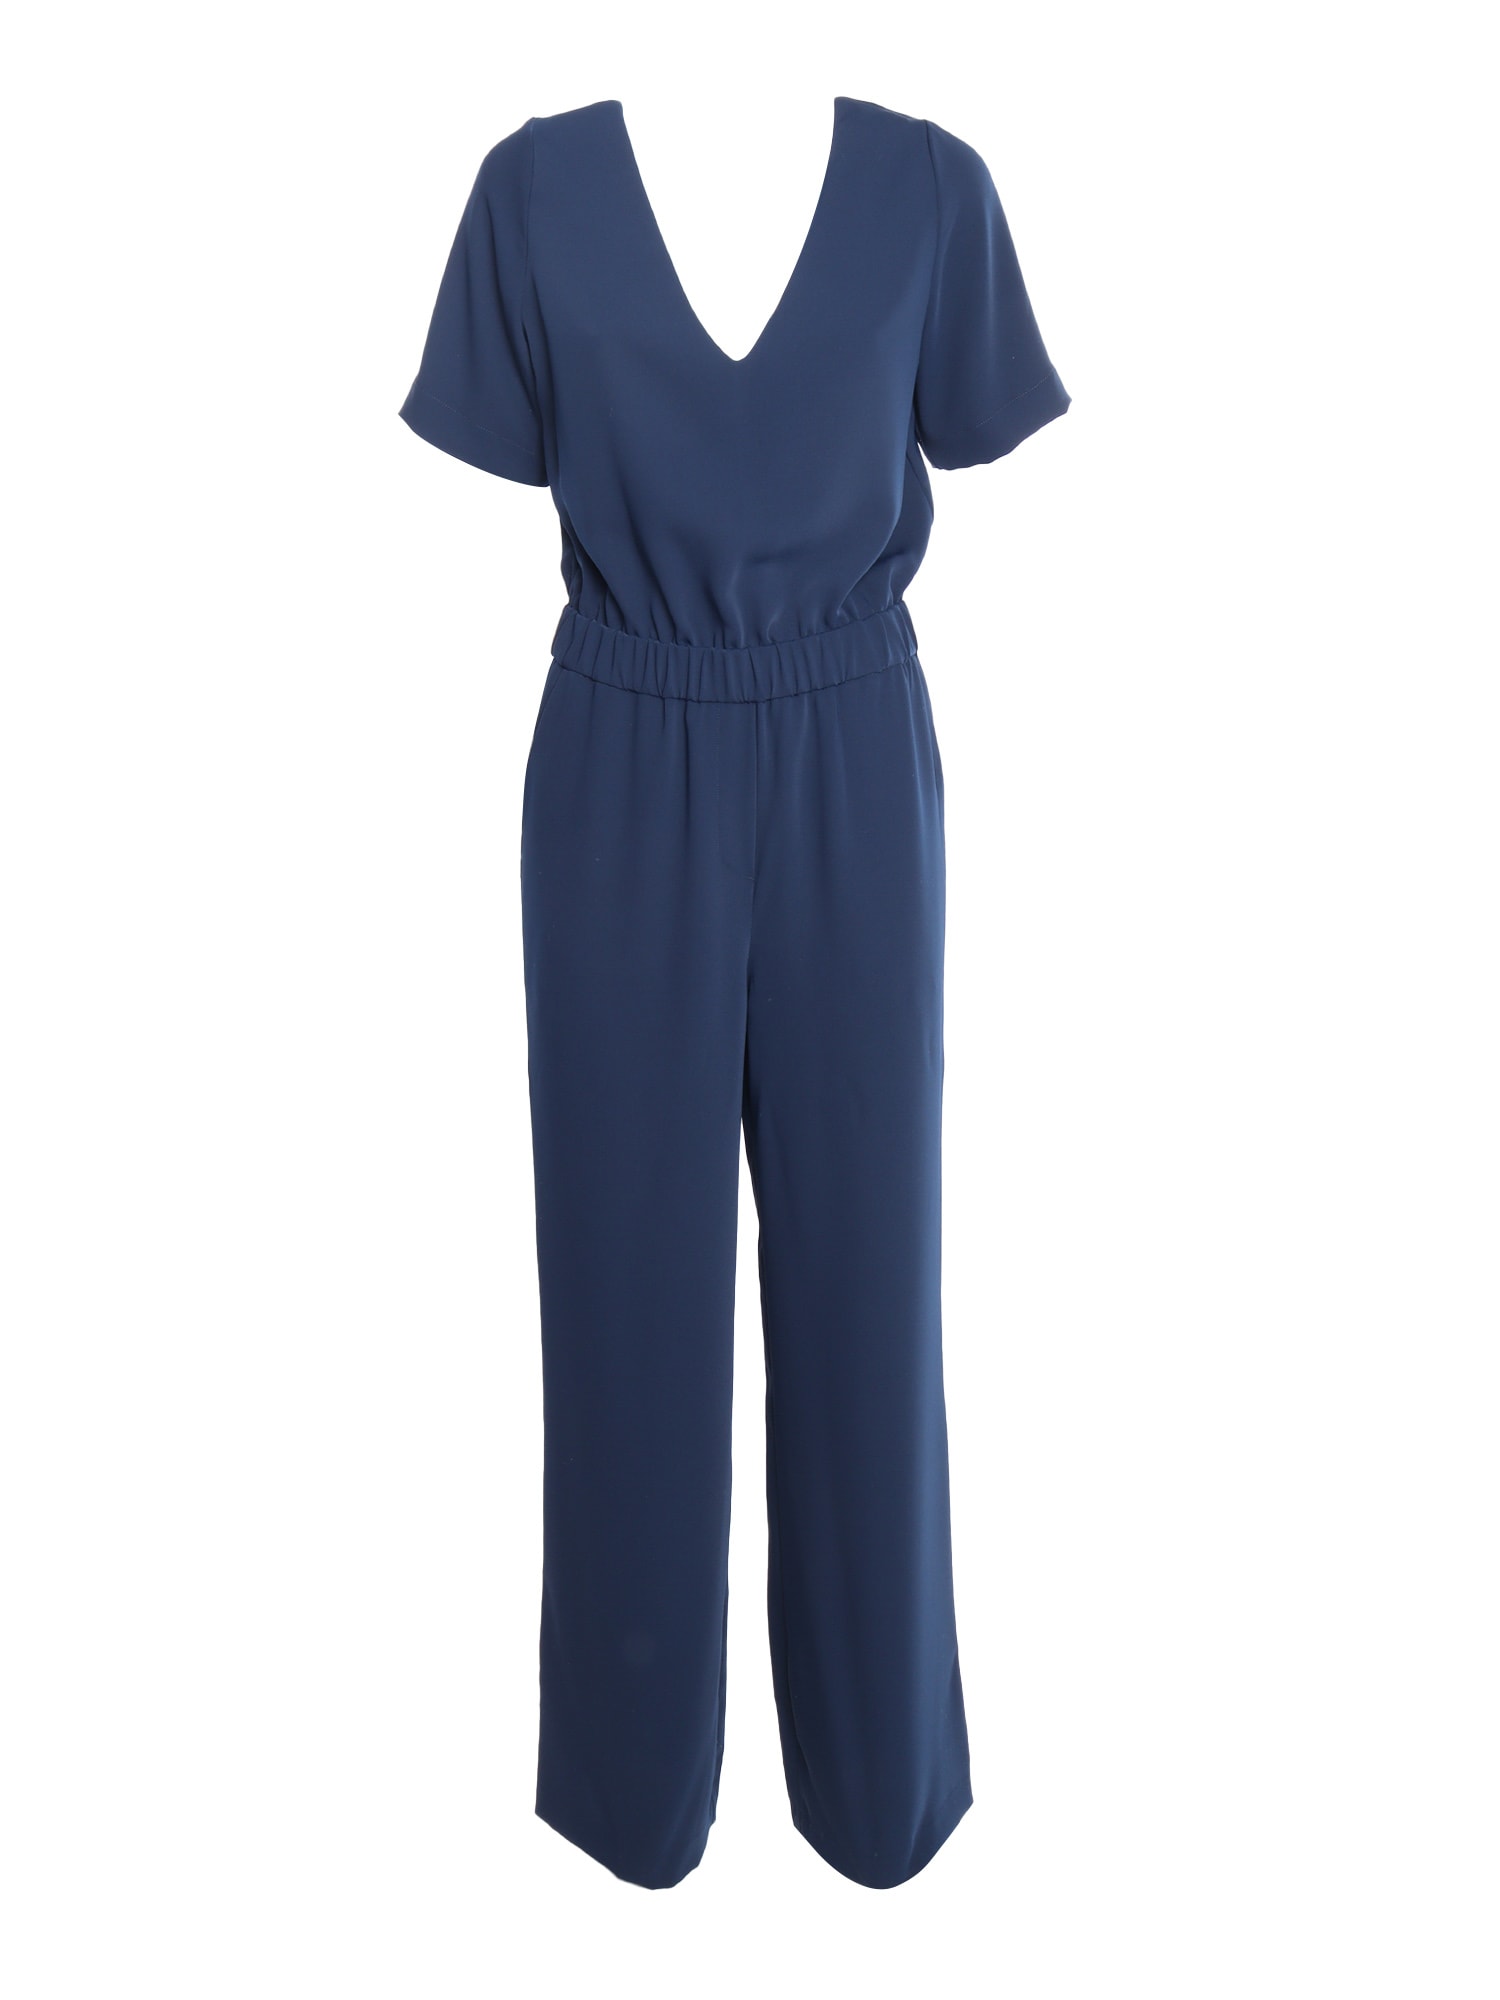 P.A.R.O.S.H. FULL JUMPSUIT 